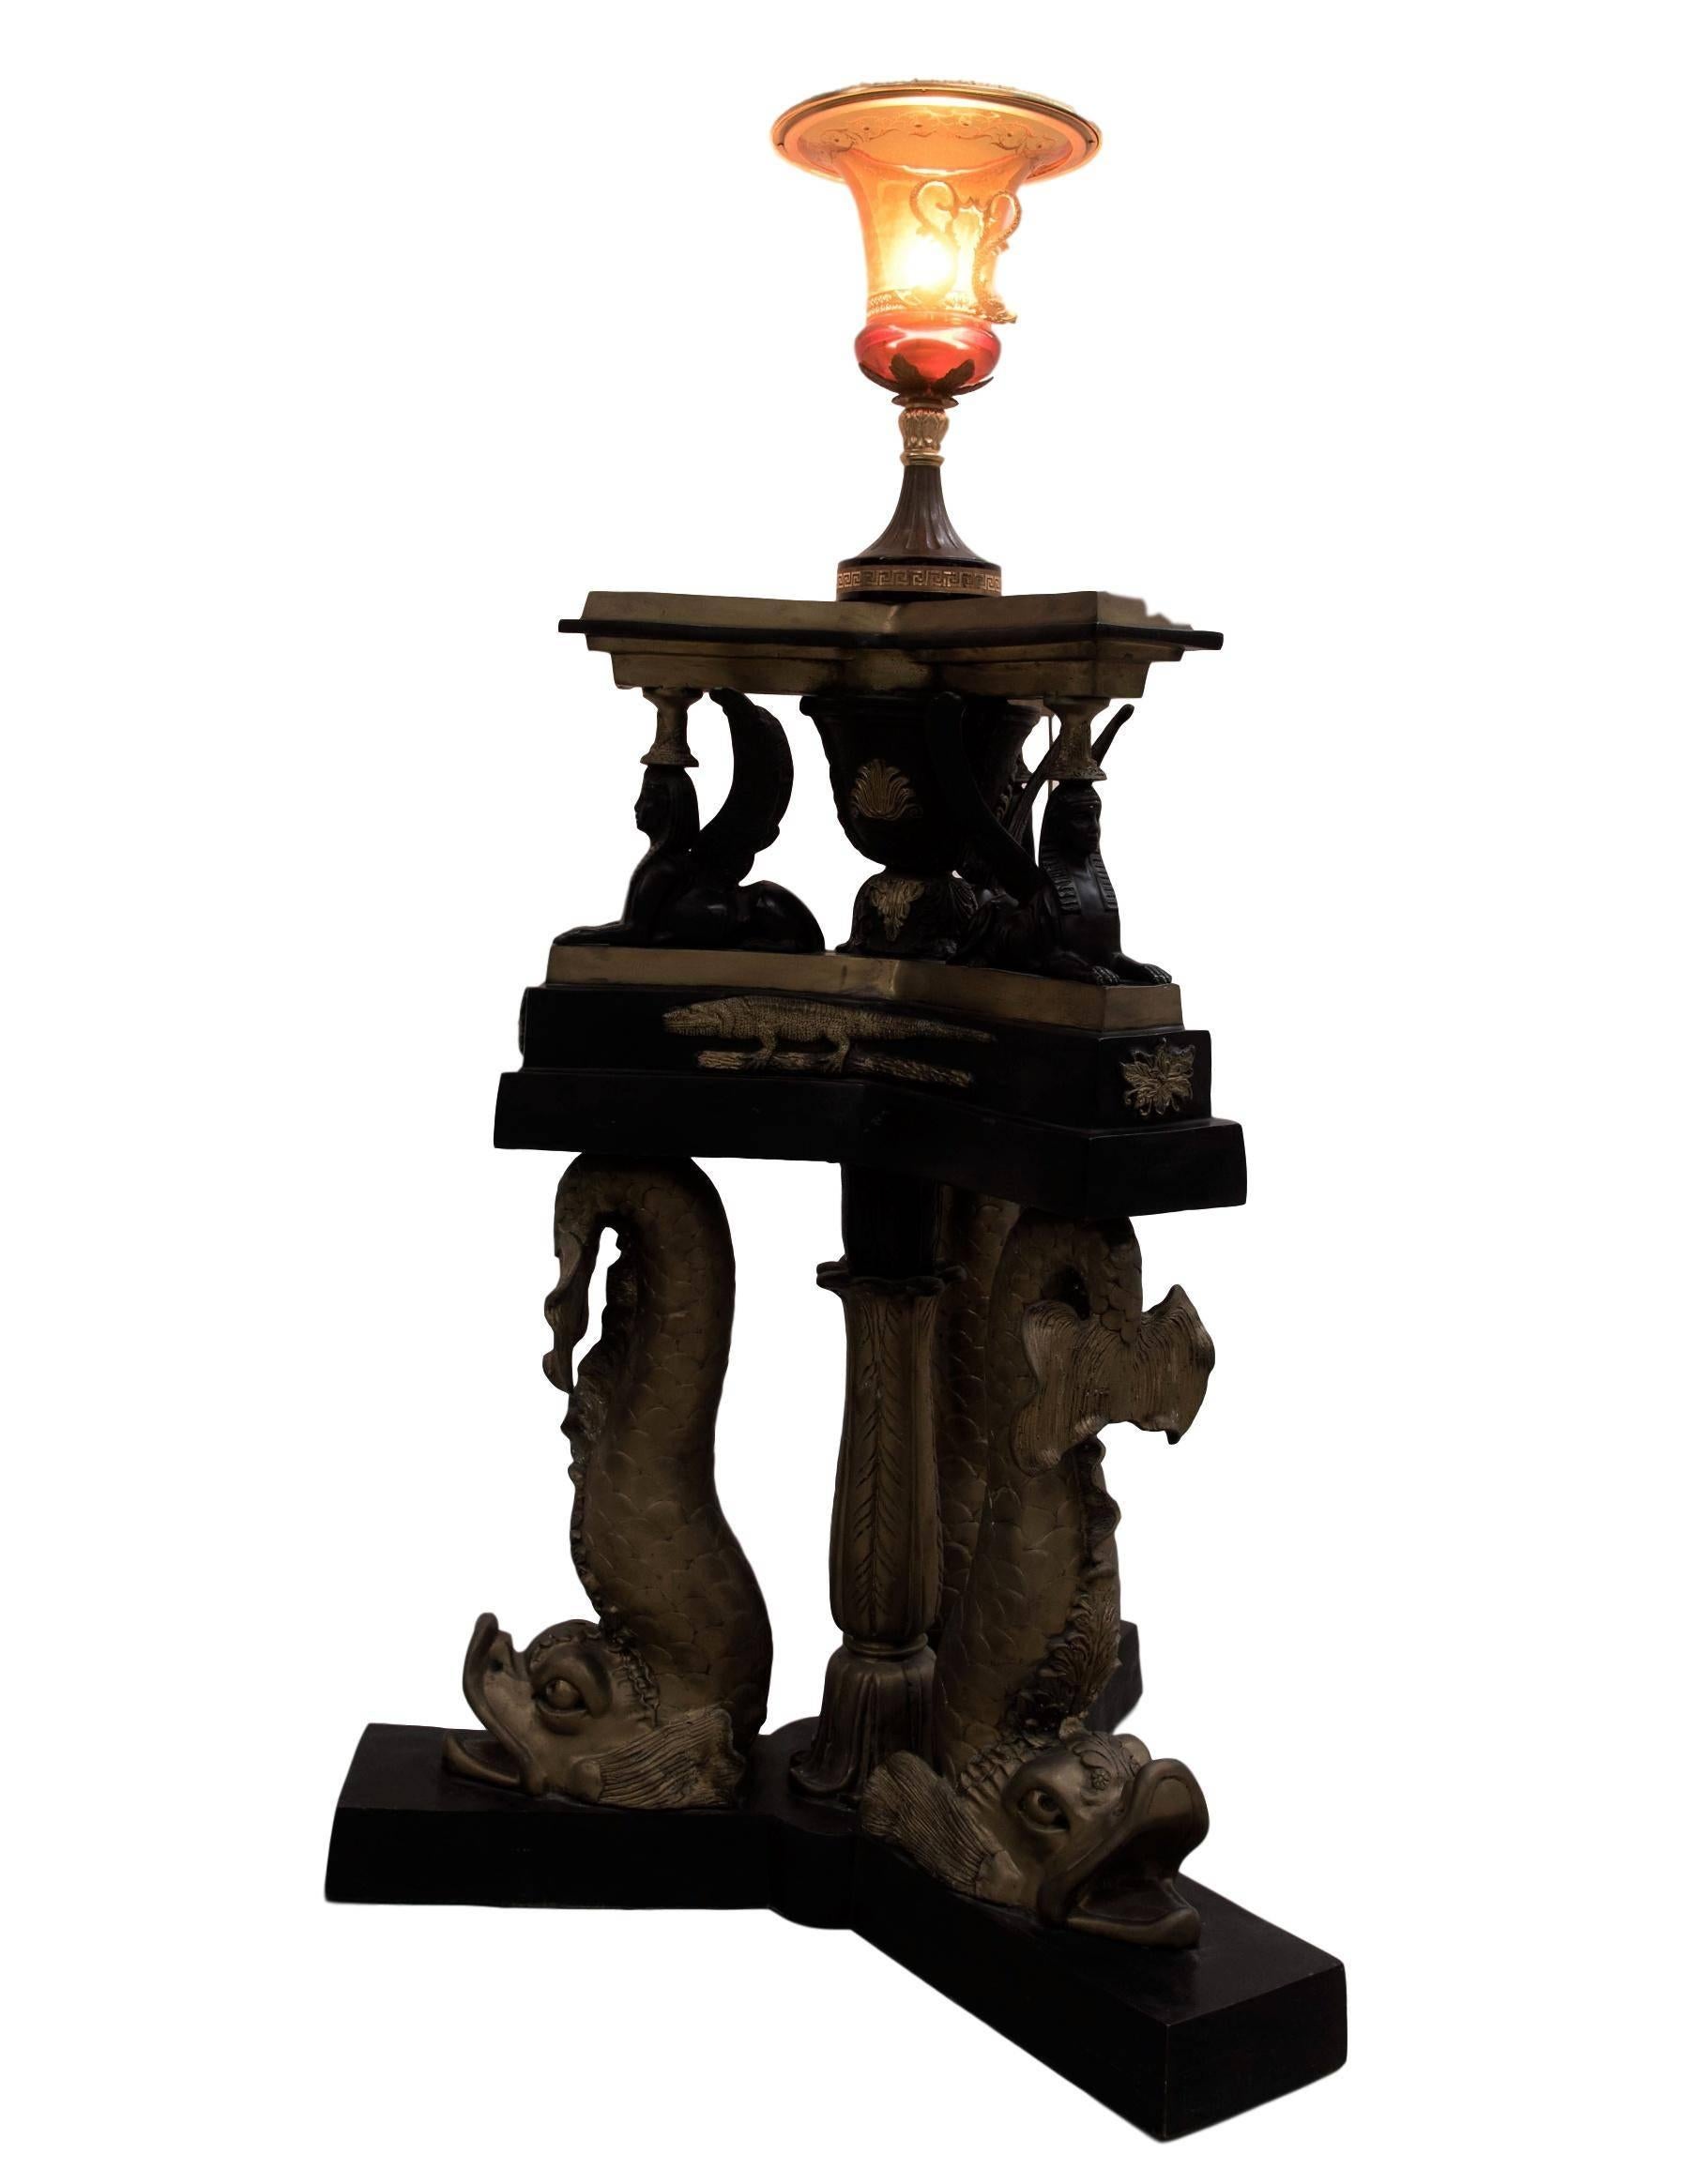 20th Century English Regency Lamp, Based on 1810 Dolphin Suite Lord Nelson Tribute Lamp